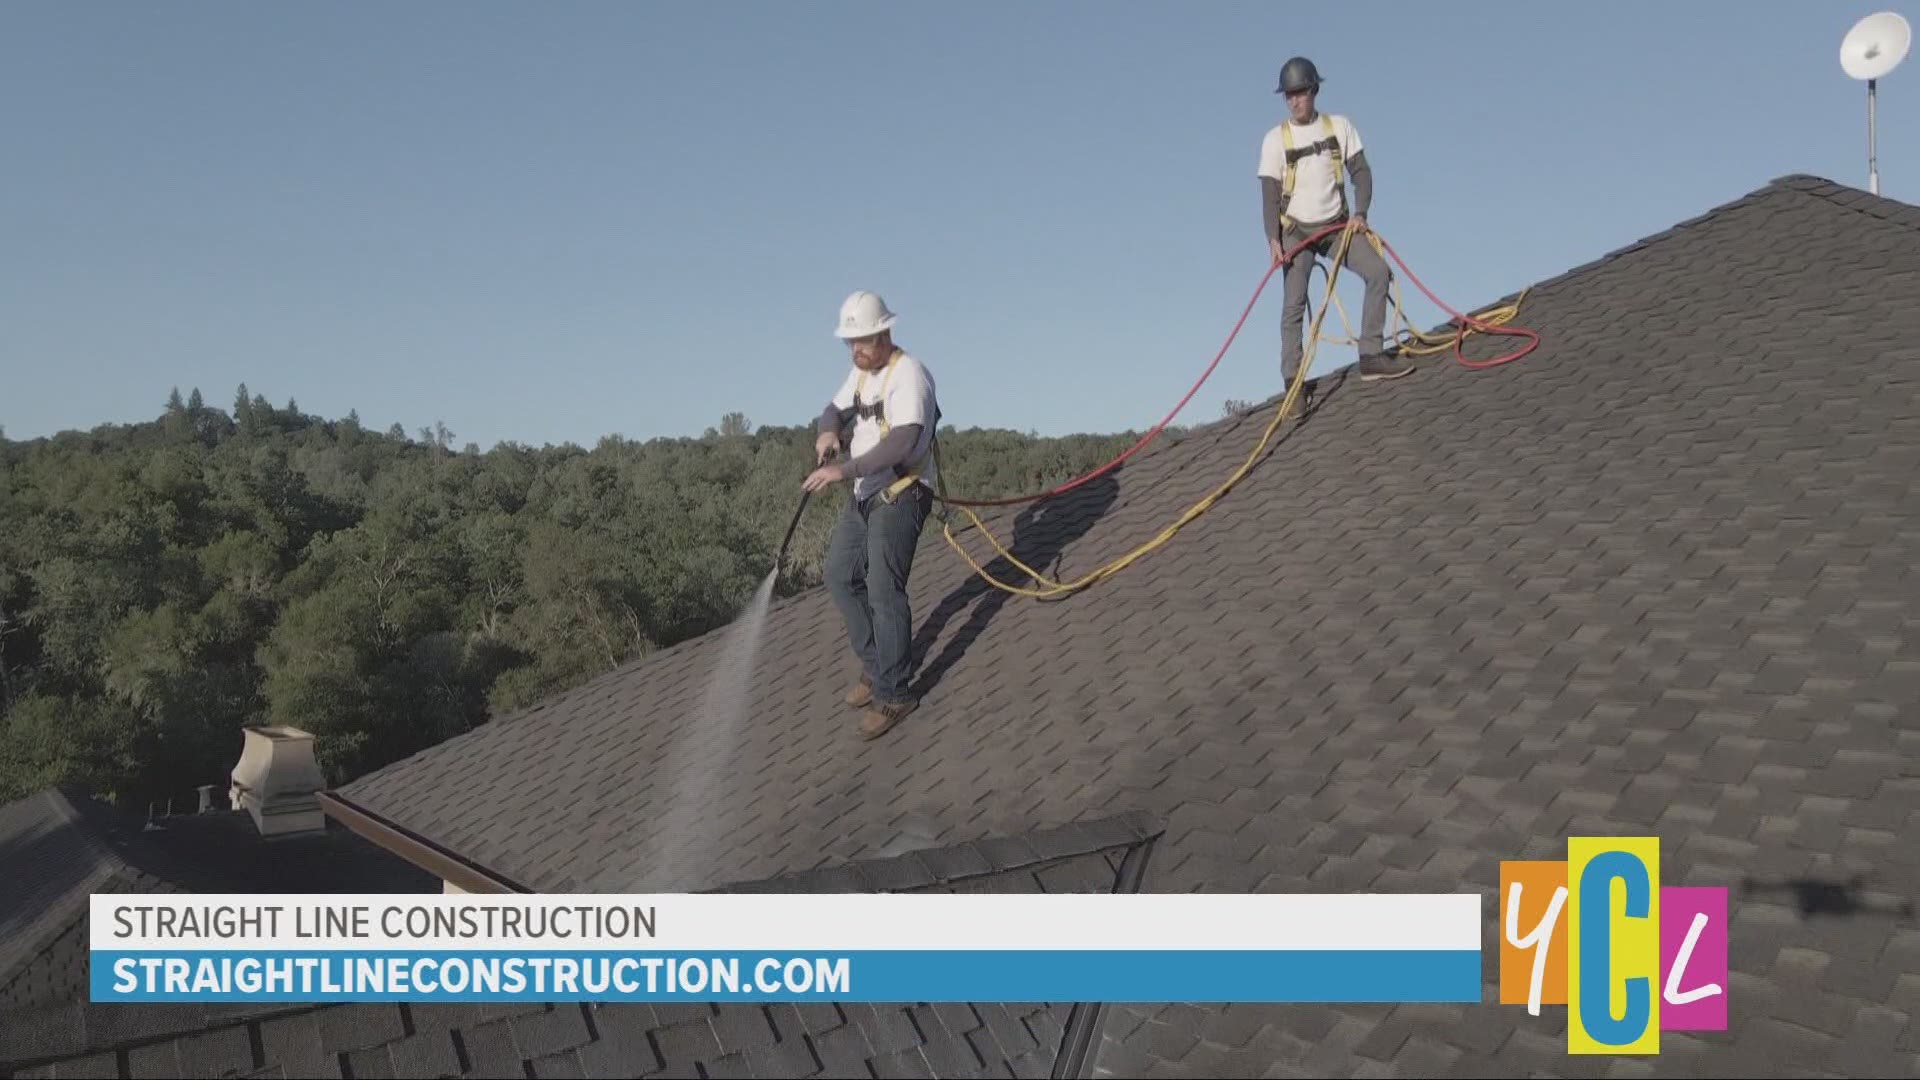 Straight Line Construction explains how homeowner’s can extend their roof’s life with Roof Maxx. This segment was paid for by Straight Line Construction.